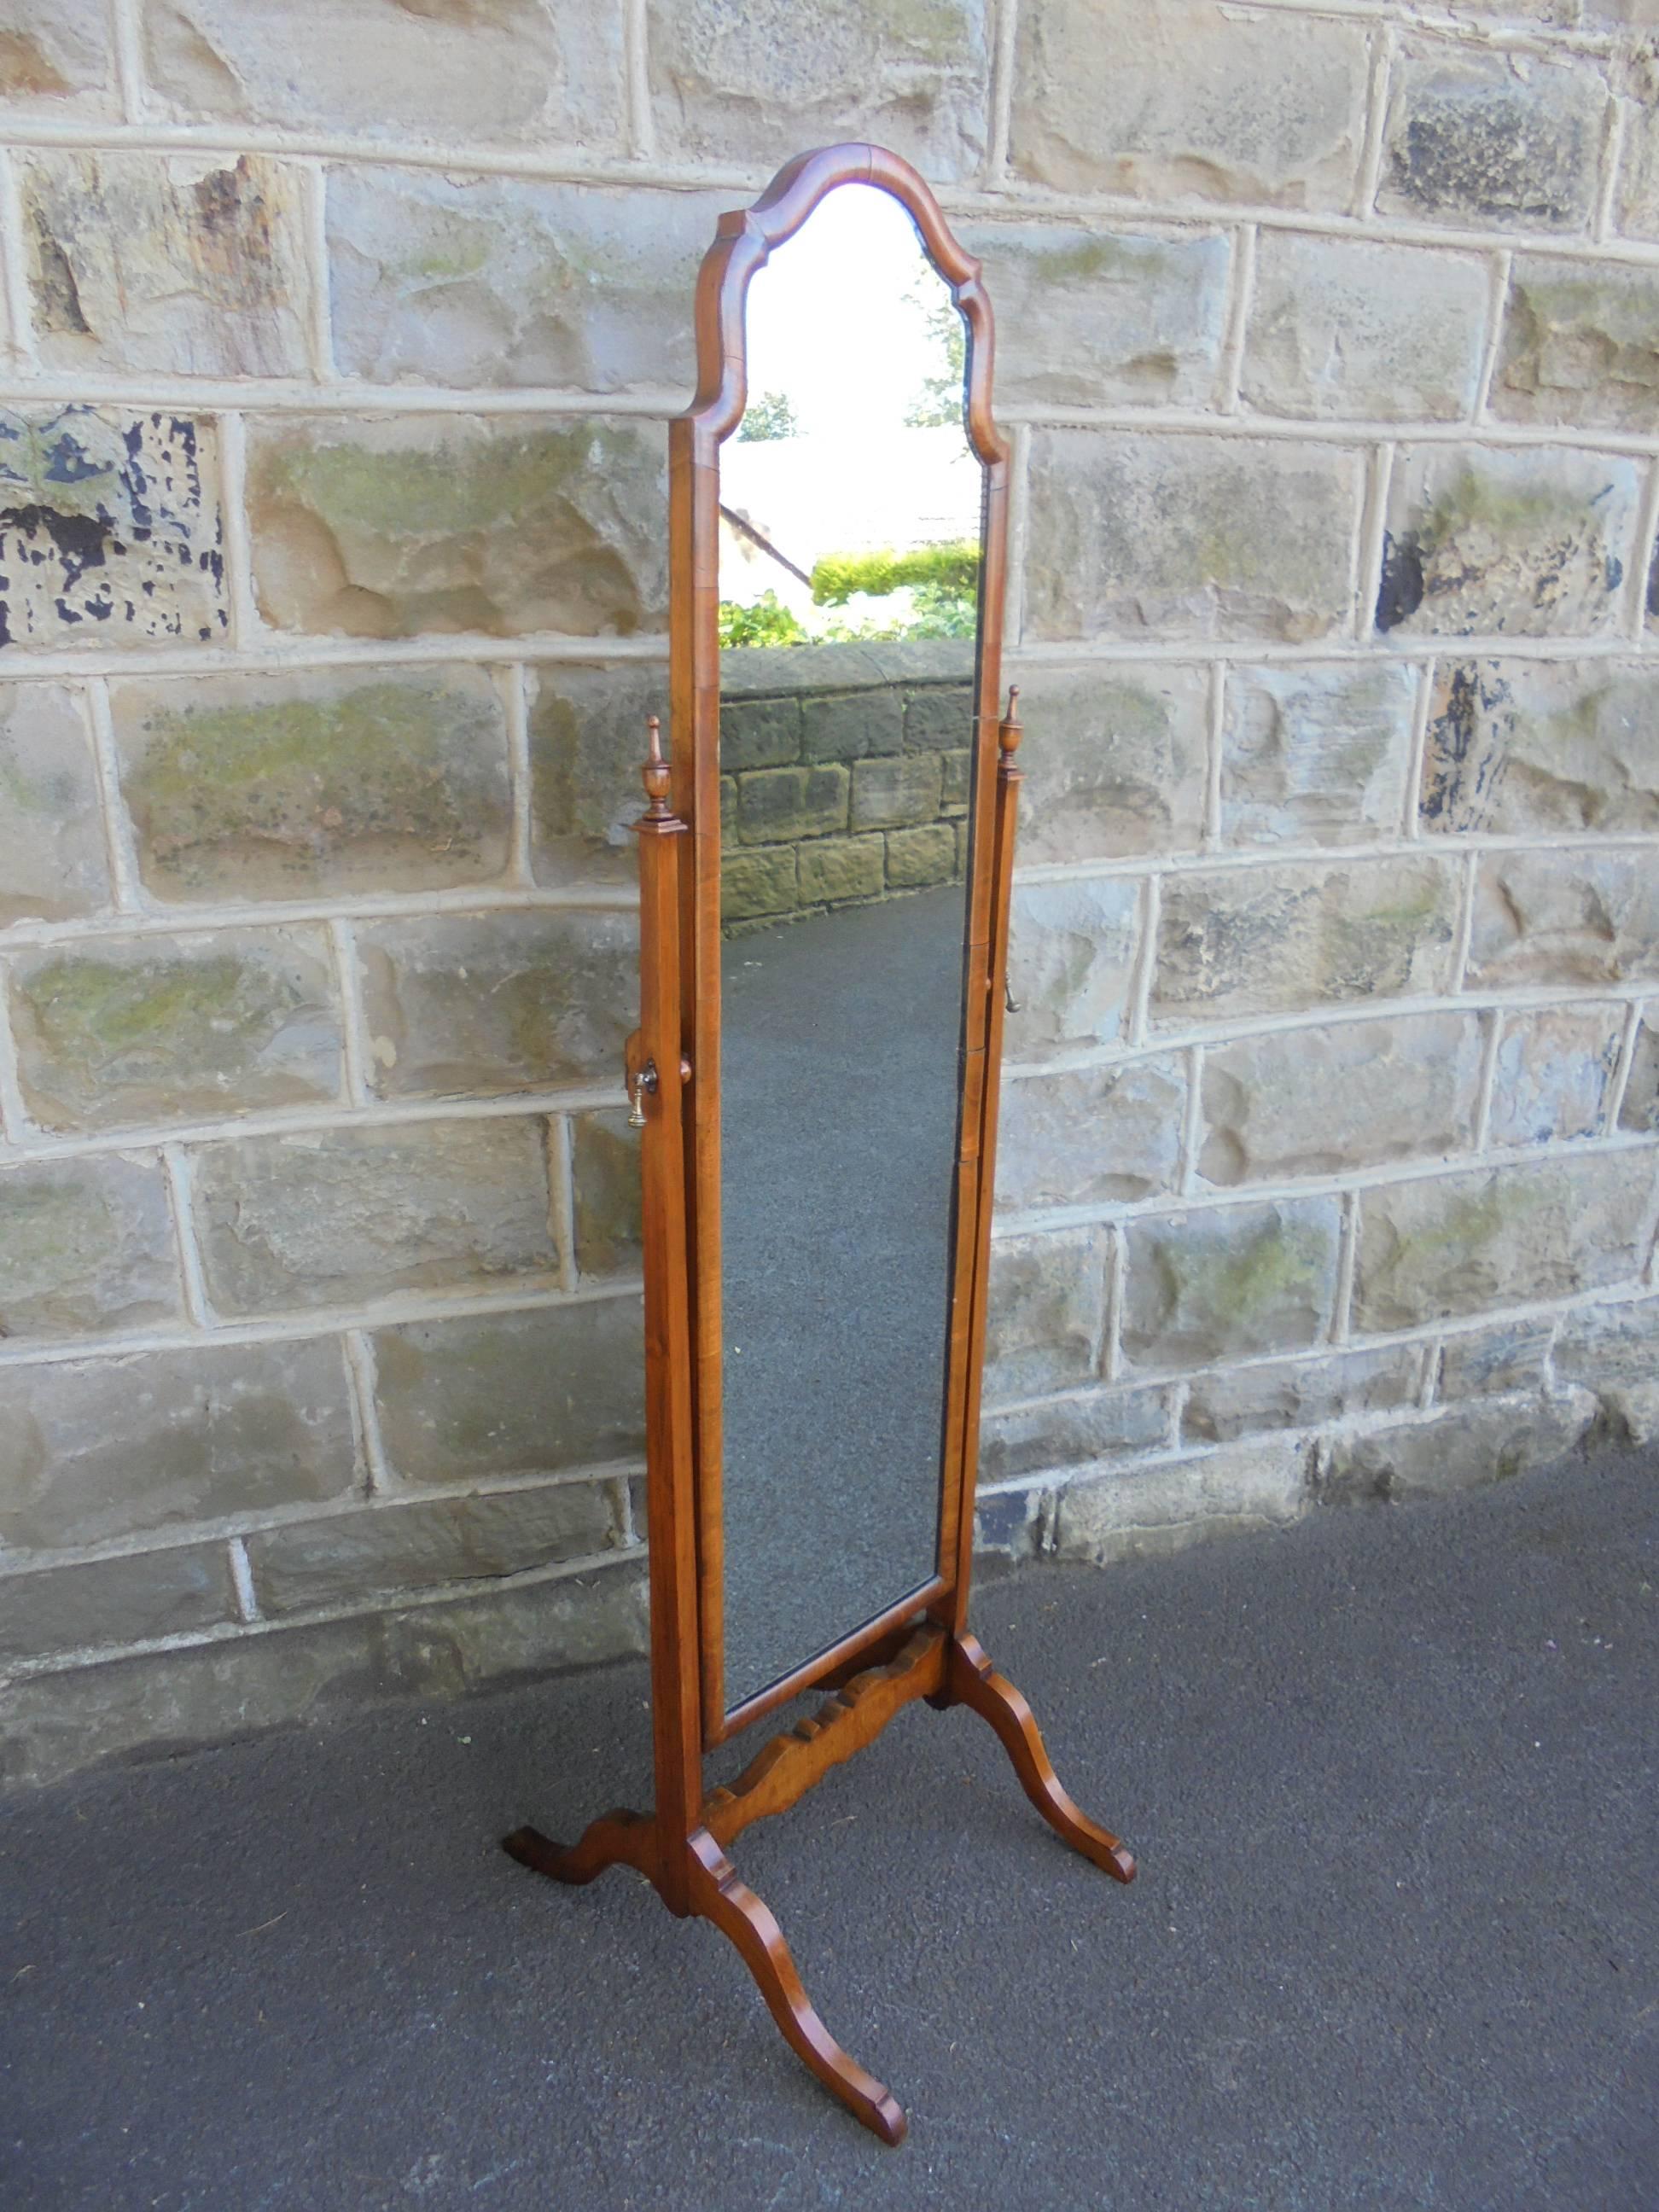 Offered for sale is this nice quality 1920s cheval dressing mirror.

Walnut frame with arched Queen Anne top. Walnut uprights with turned finials at the top, brass drop handles to support the mirror. Standing on shaped walnut legs with a shaped